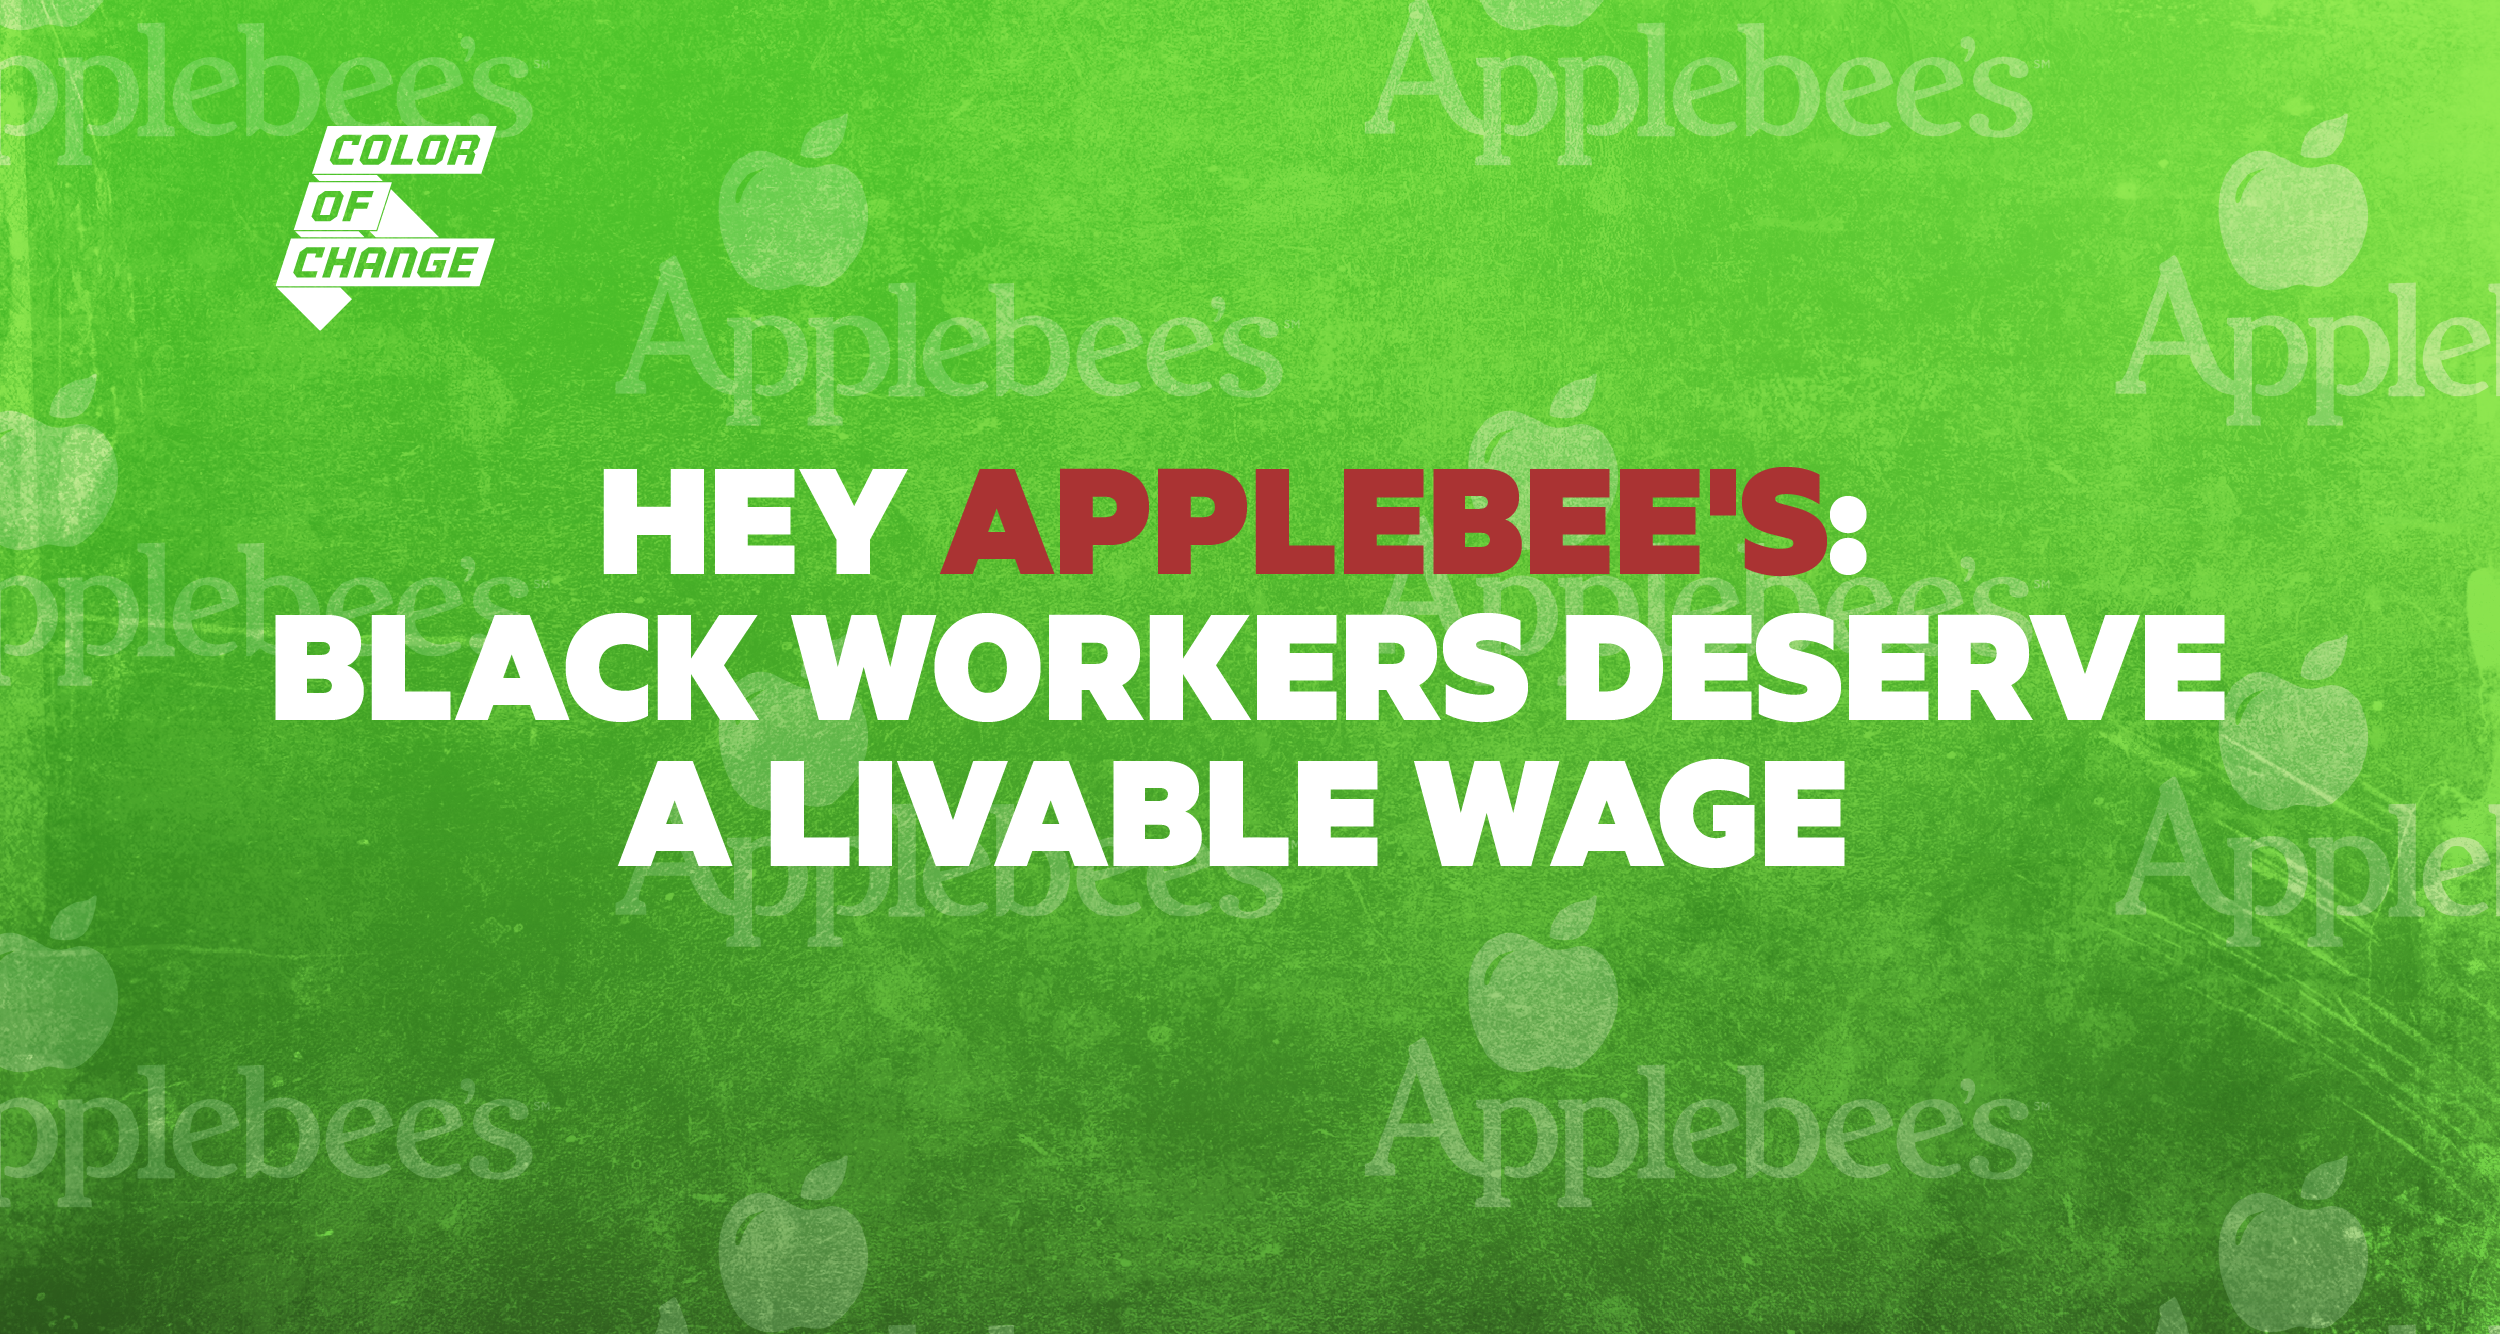 Green background with the Applebee's logo repeated in a pattern. White text on top reading: Hey Applebee's: Black Workers deserve a Livable Wage